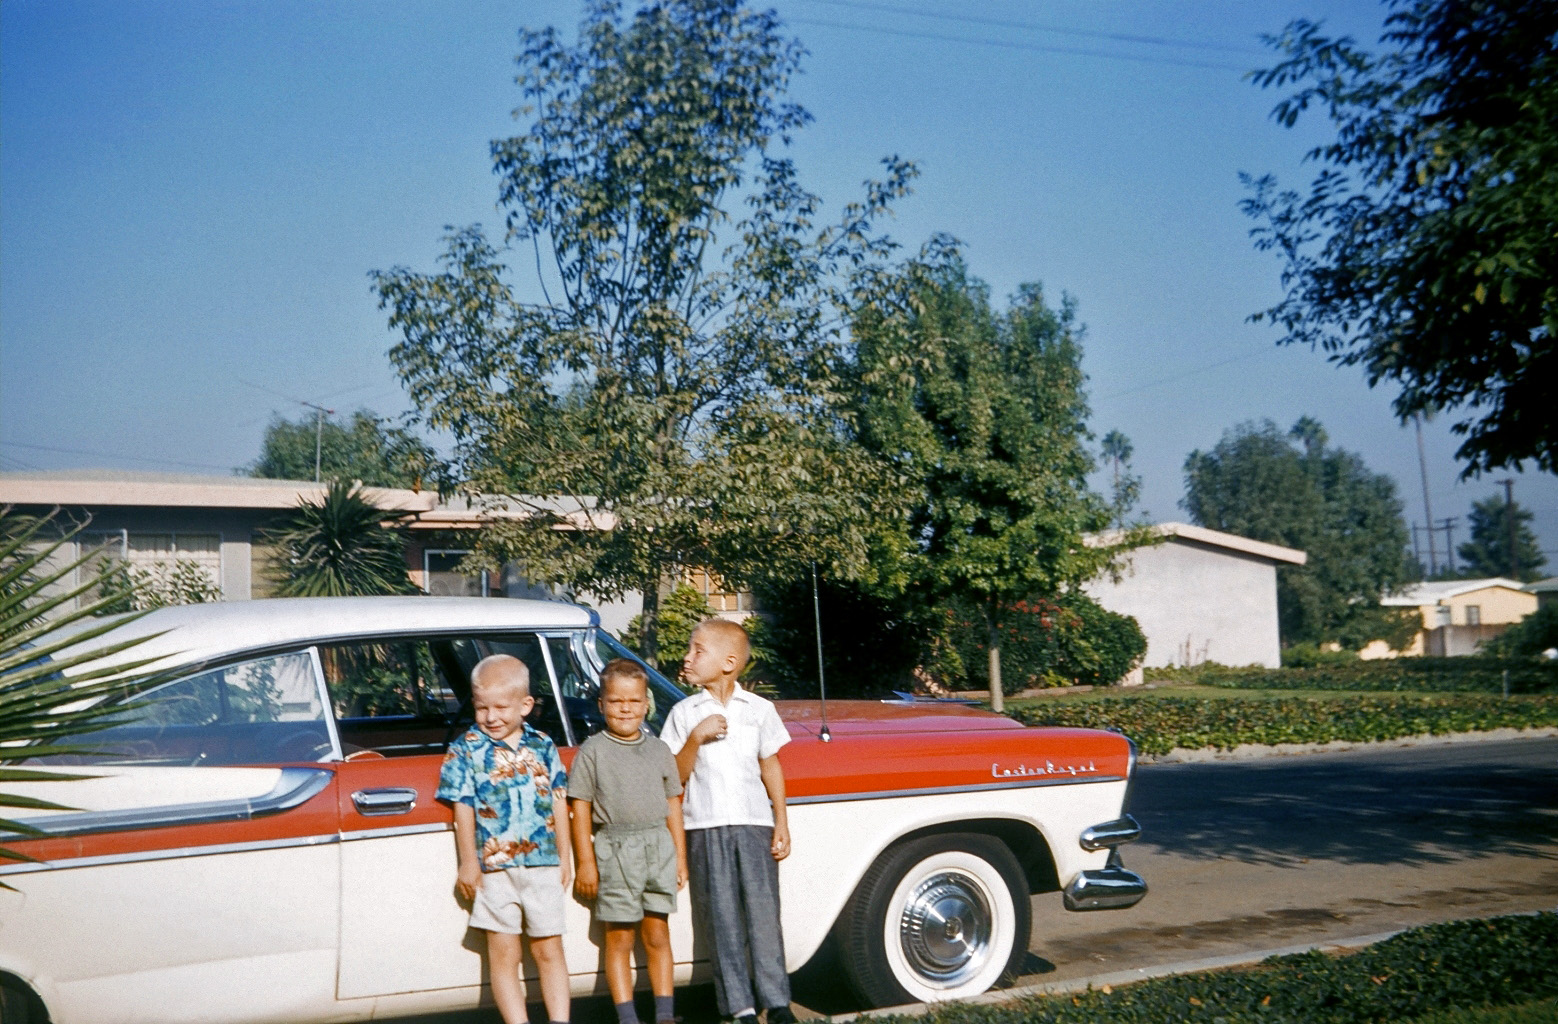 Well, here are the troublemakers, the neighborhood clowns, the jamokes. This car was in front of my house at 222 N. Mardina Street, West Covina, California about 1961 or so. I do not recall whose car this was. I'm the kid on the left. Doug is in the middle and Dennis is making the face on the right. We were all the same age, but Dennis was bigger.

Our homes were adjacent: mine, Dennis's and Doug's. They had built-in pools, and boy did I take advantage. Doug's dad was a construction guy, kind of loud and gruff. Summertimes when we were at his house swimming, Jack (his dad) would come home from work and upon seeing us kids would say, "What are you jamokes up to?" in a most affectionate way. Now the word: Urban Dictionary says jamoke is "a clumsy loser who is incapable of doing normal human tasks." We were friends forever, at least as long as it lasted. And it did for several years.

And hey, the car is a 1957 Dodge. View full size.